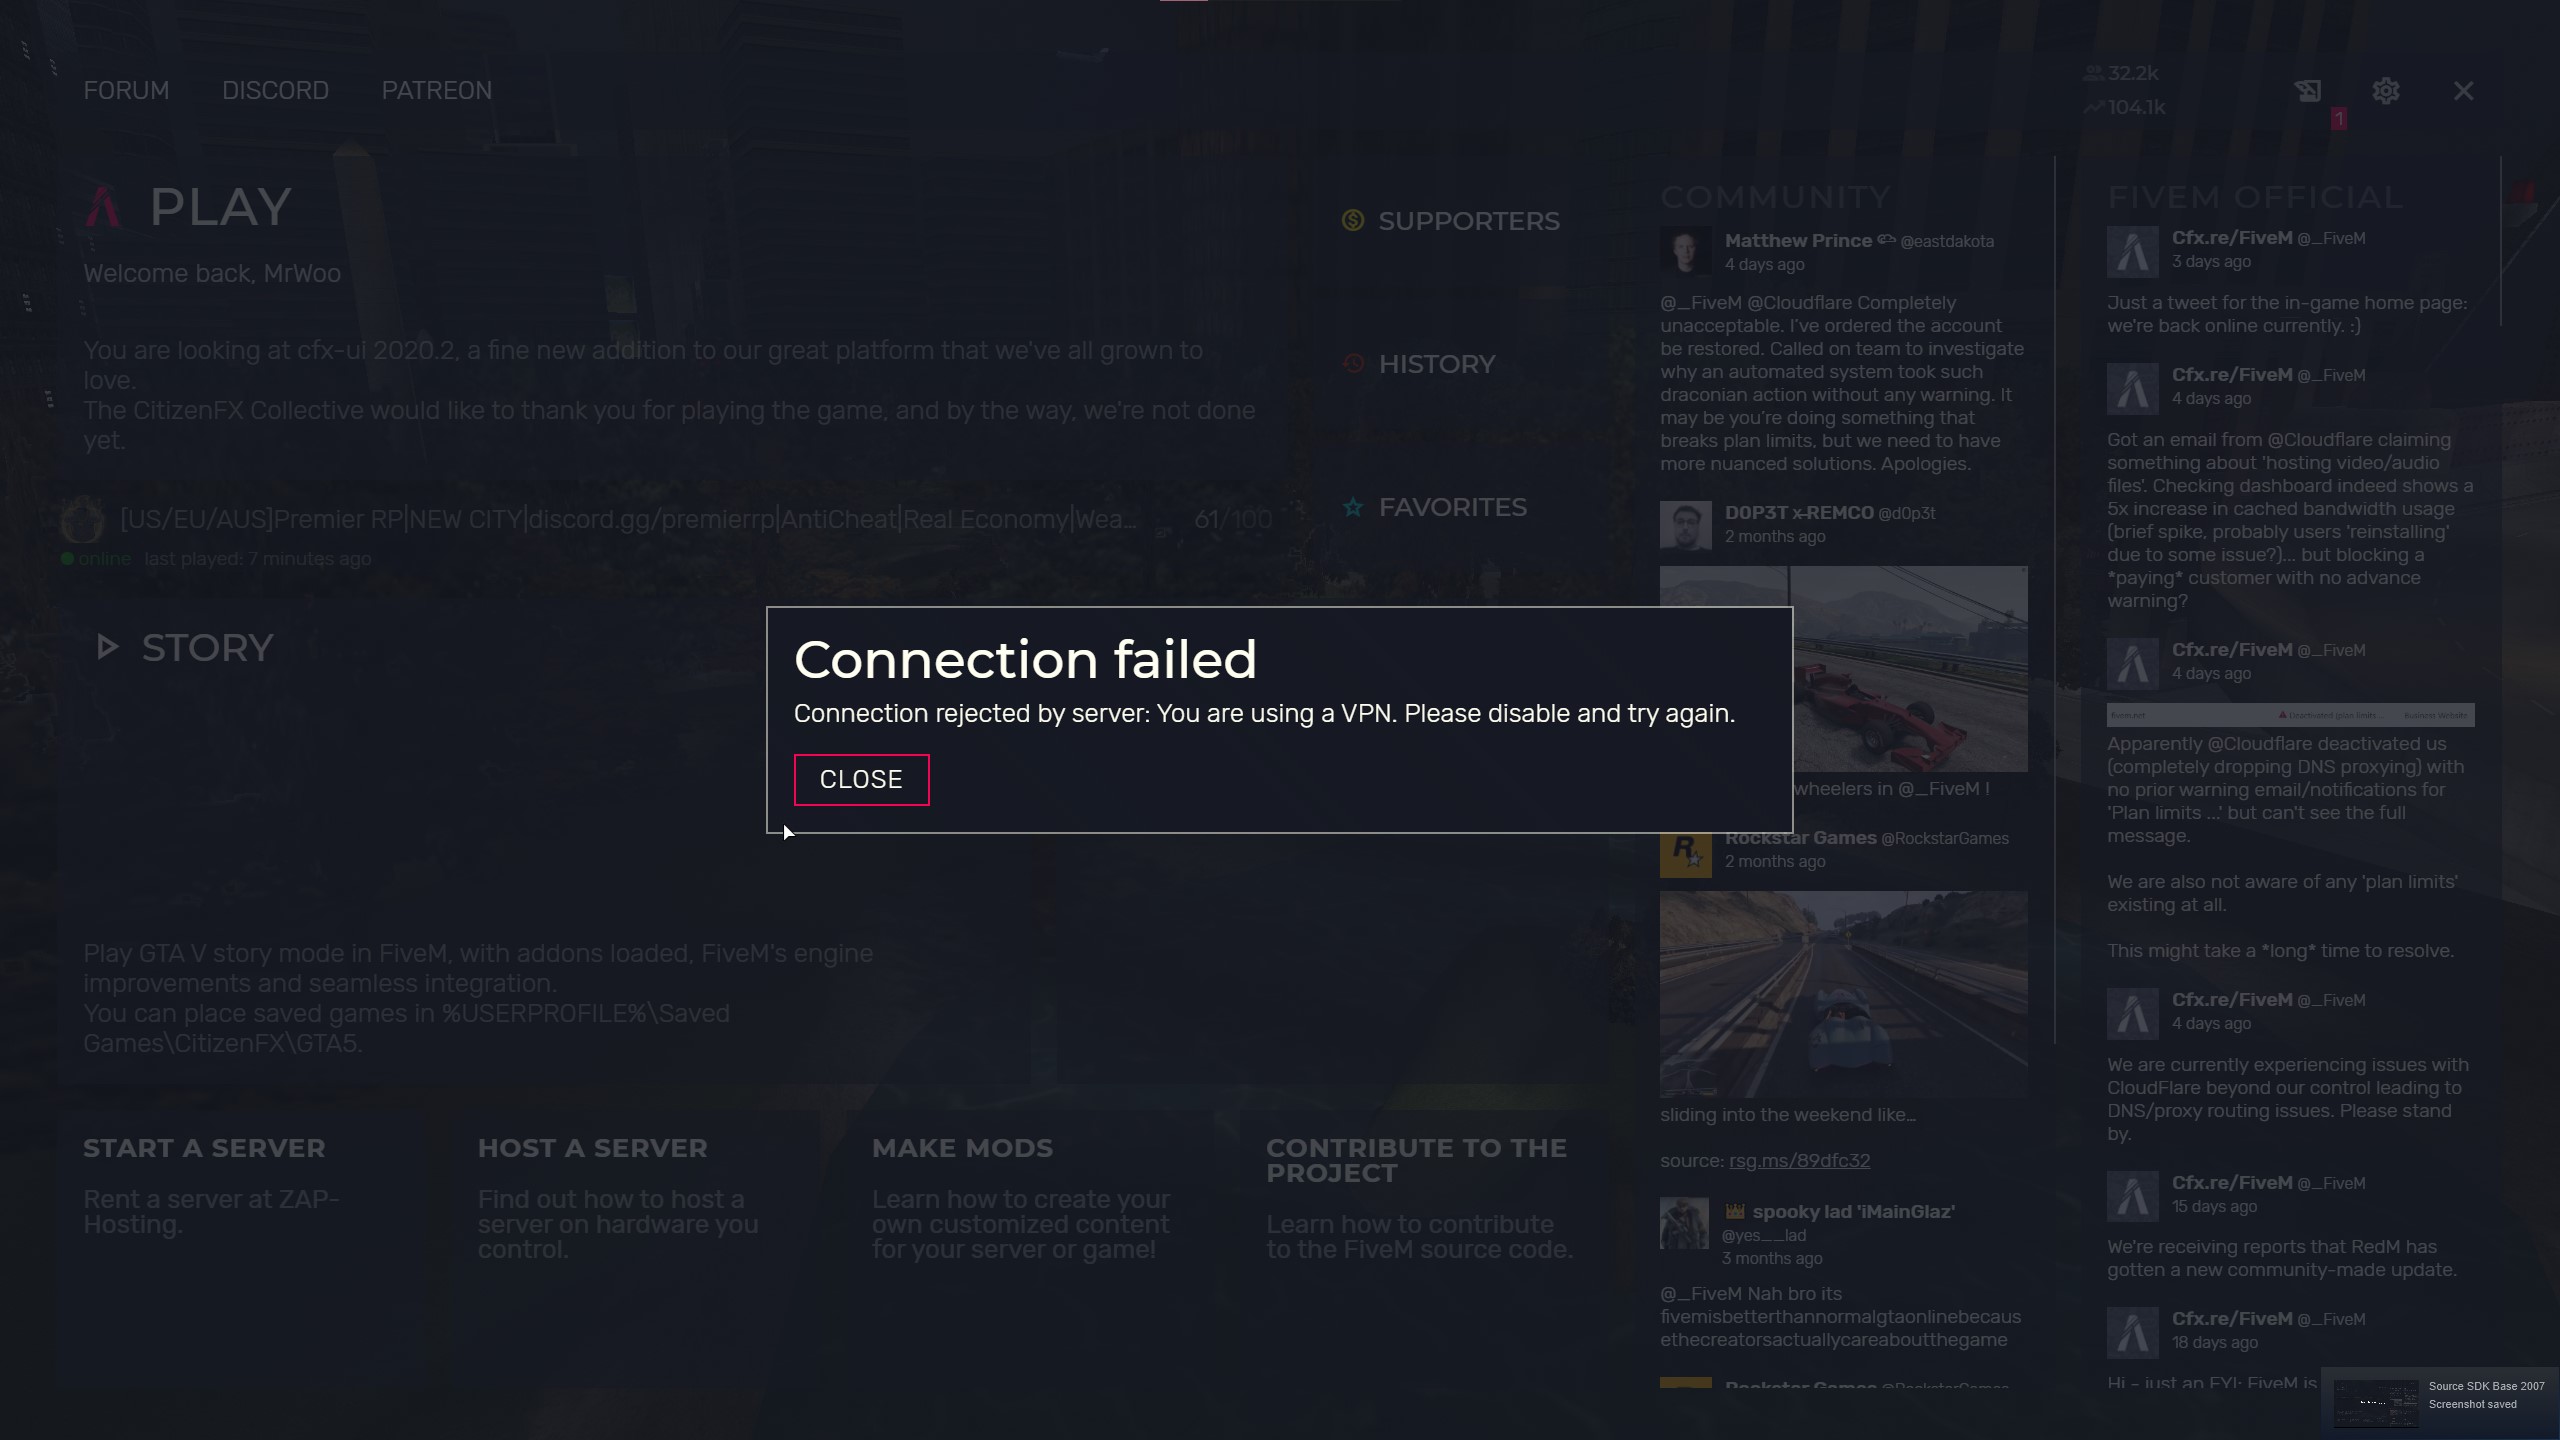 Connection rejected unacceptable nickname Arizona Rp. Connection failed rust